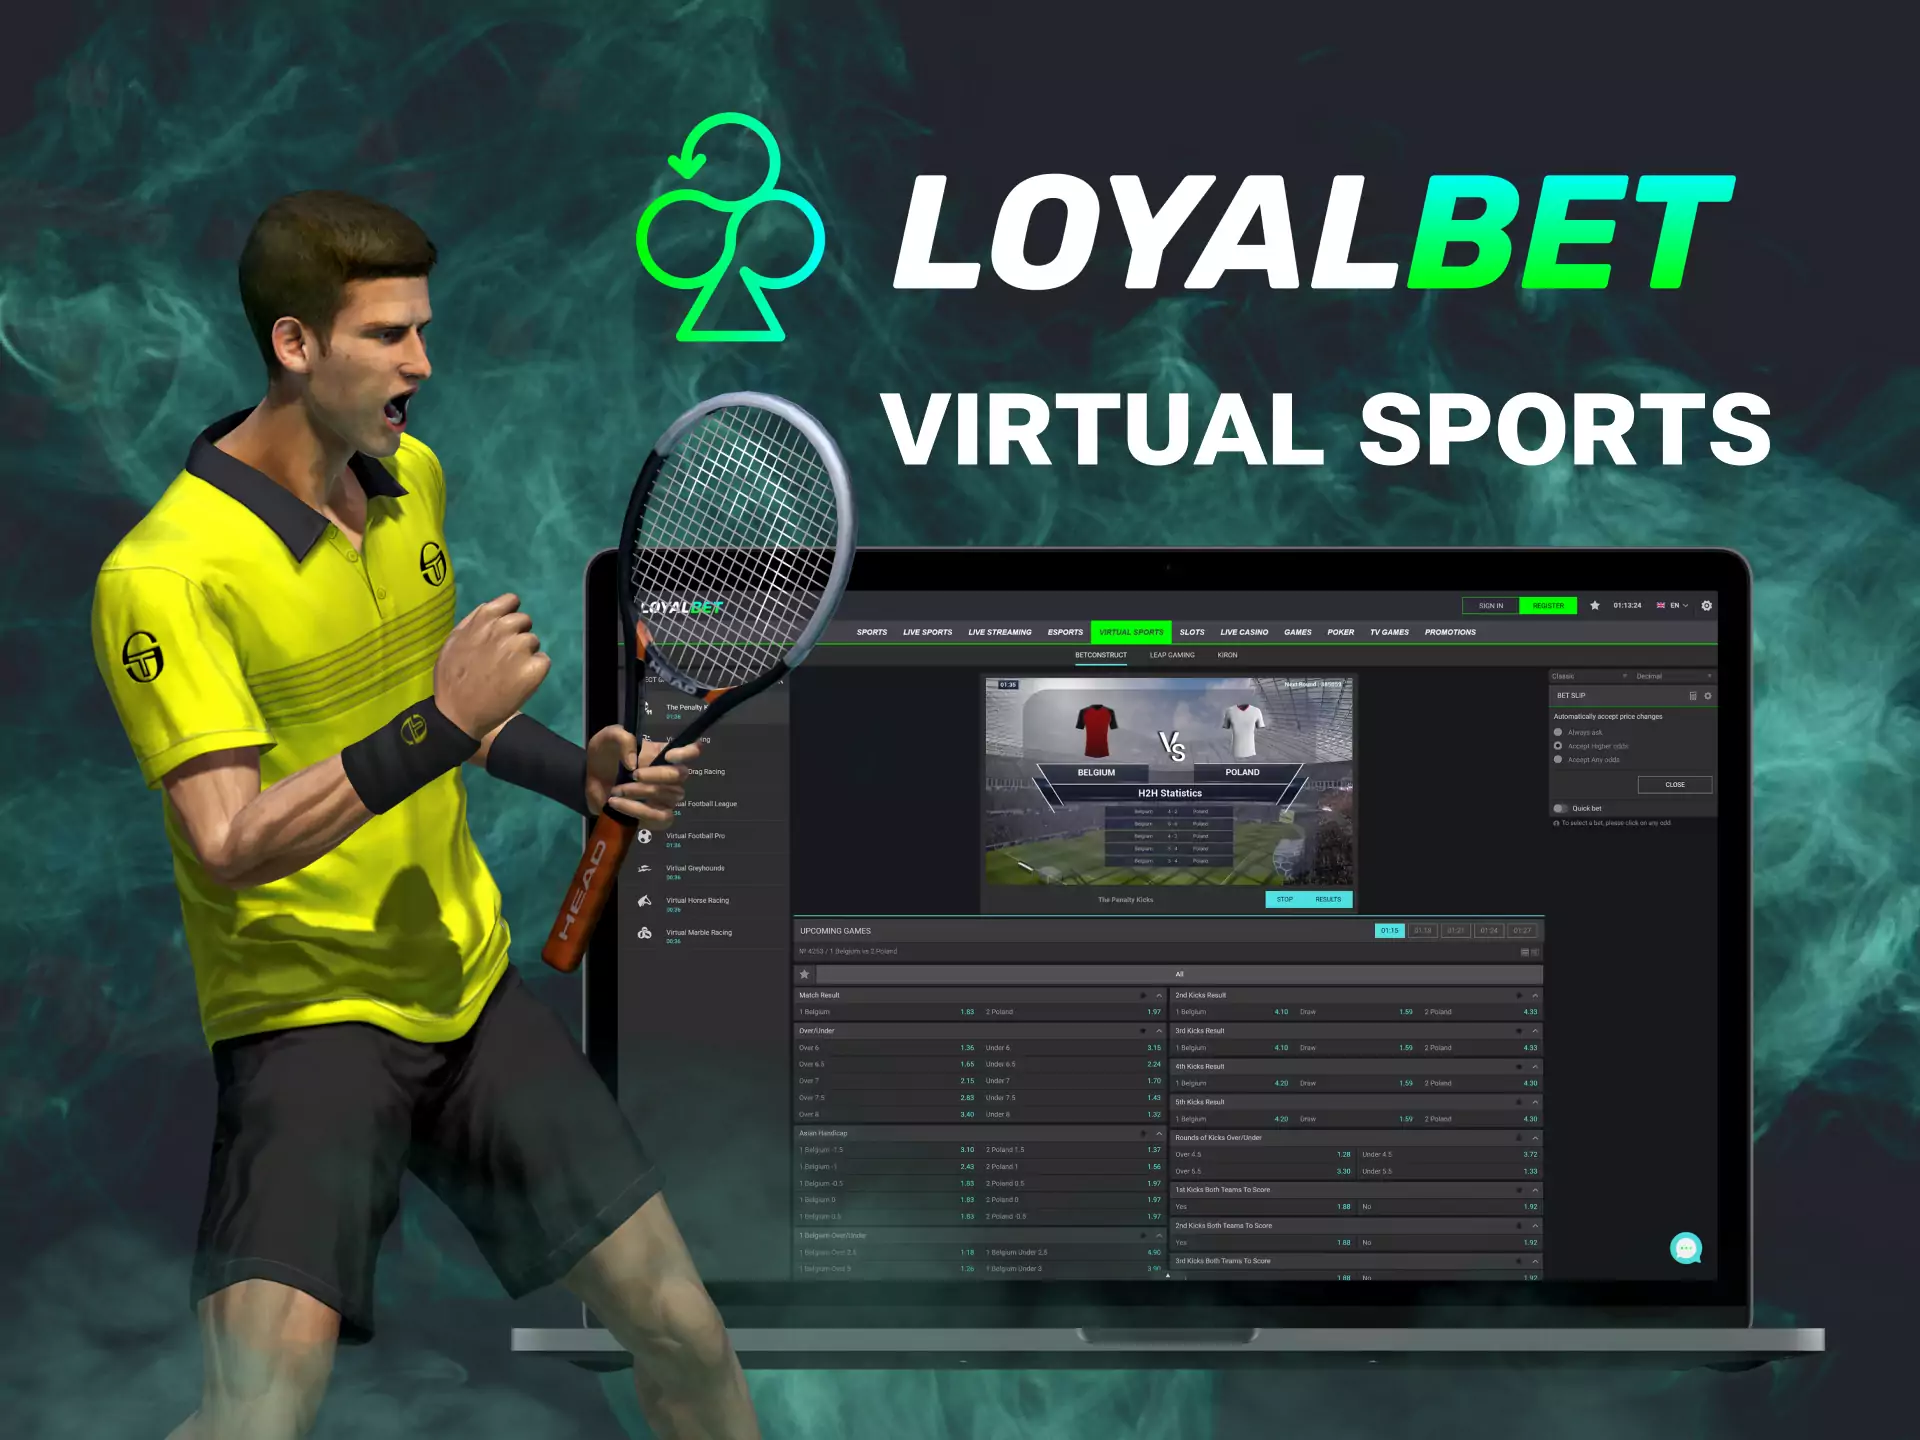 Betting on virtual sports matches also attracts users of Loyalbet.